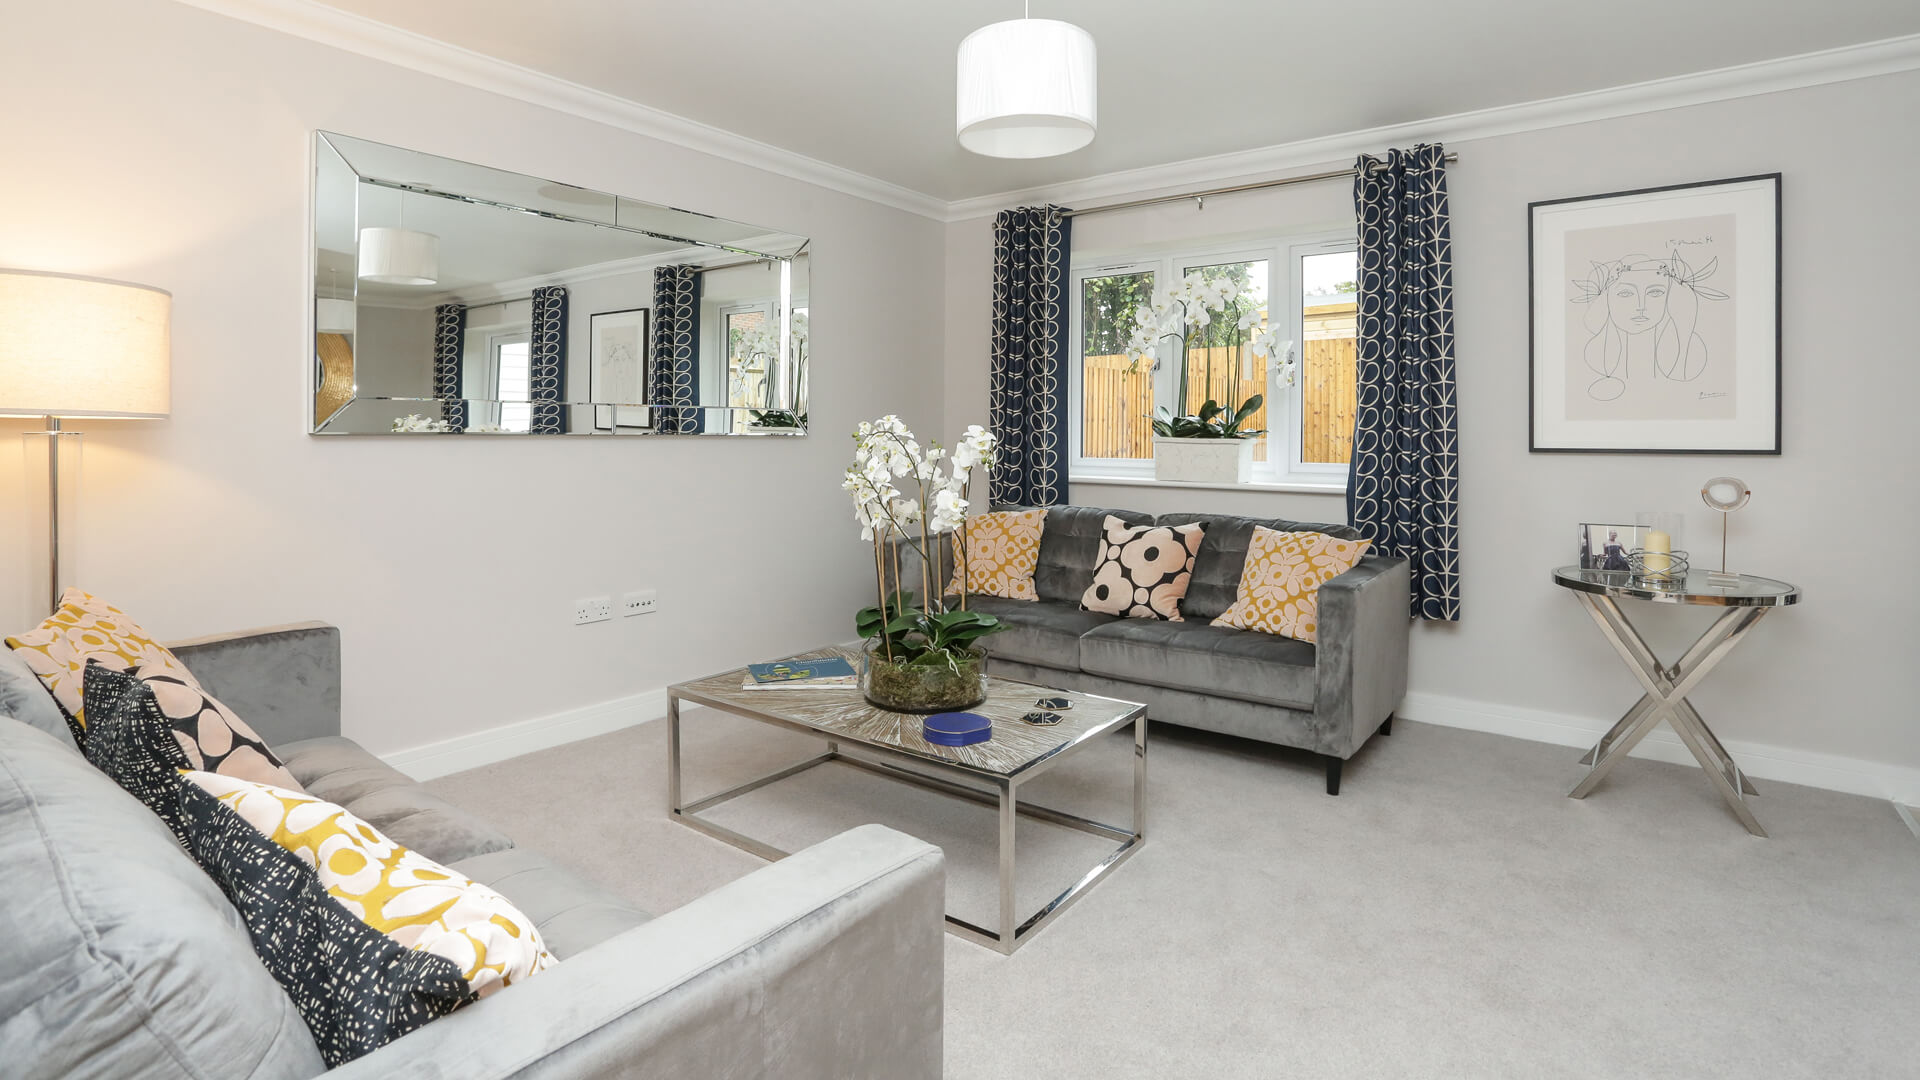 Living room at our Churchfields development.